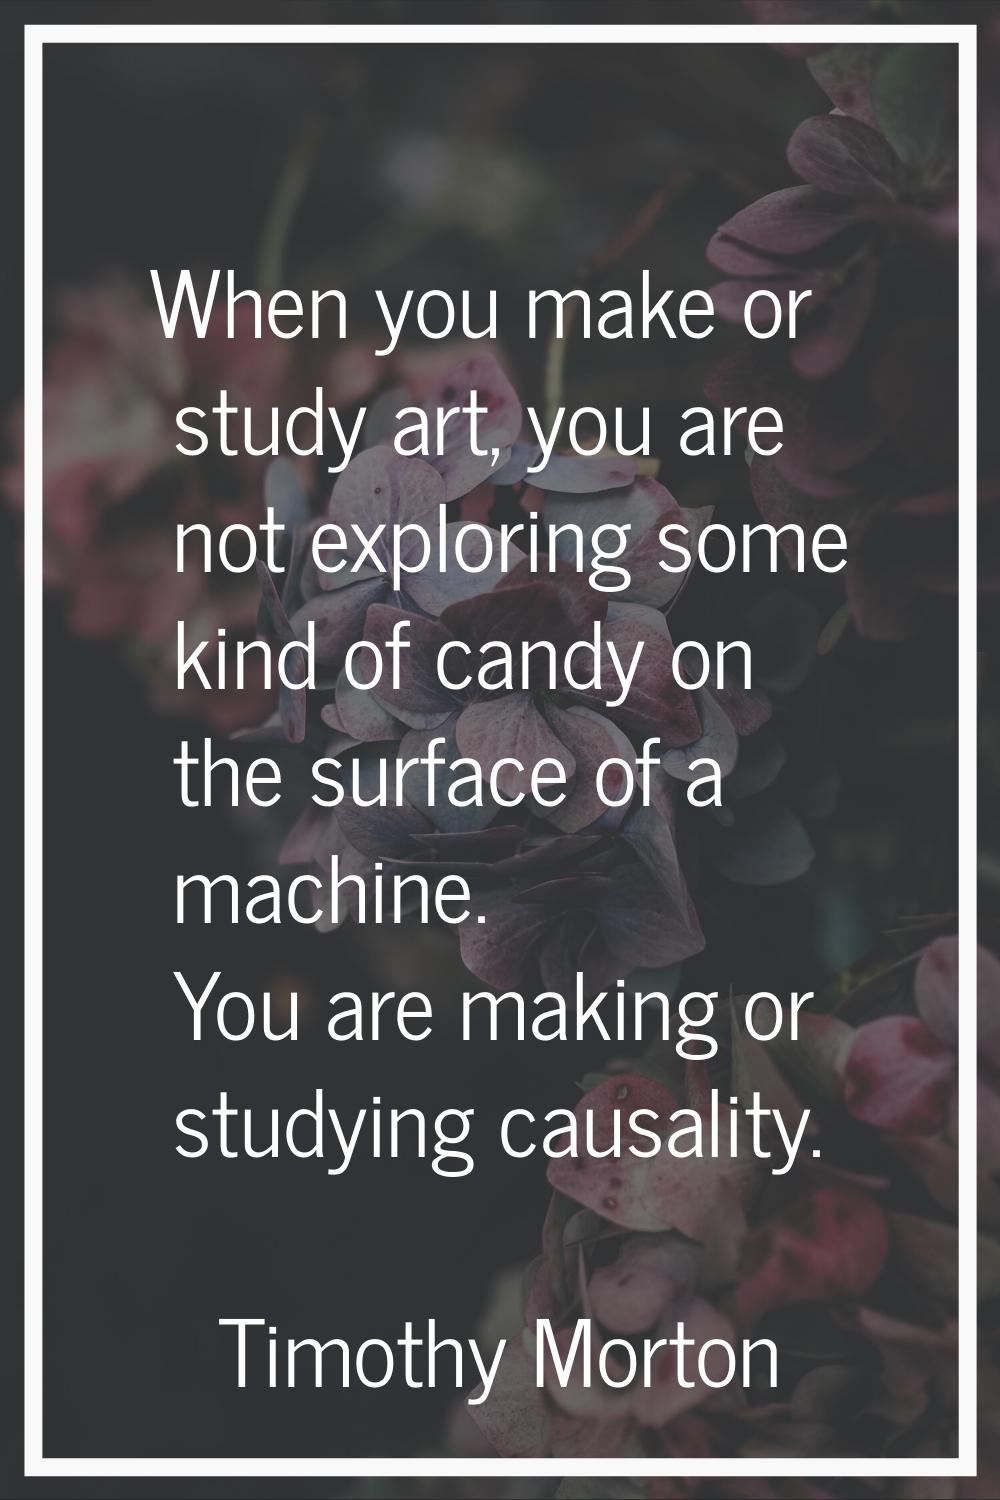 When you make or study art, you are not exploring some kind of candy on the surface of a machine. Y